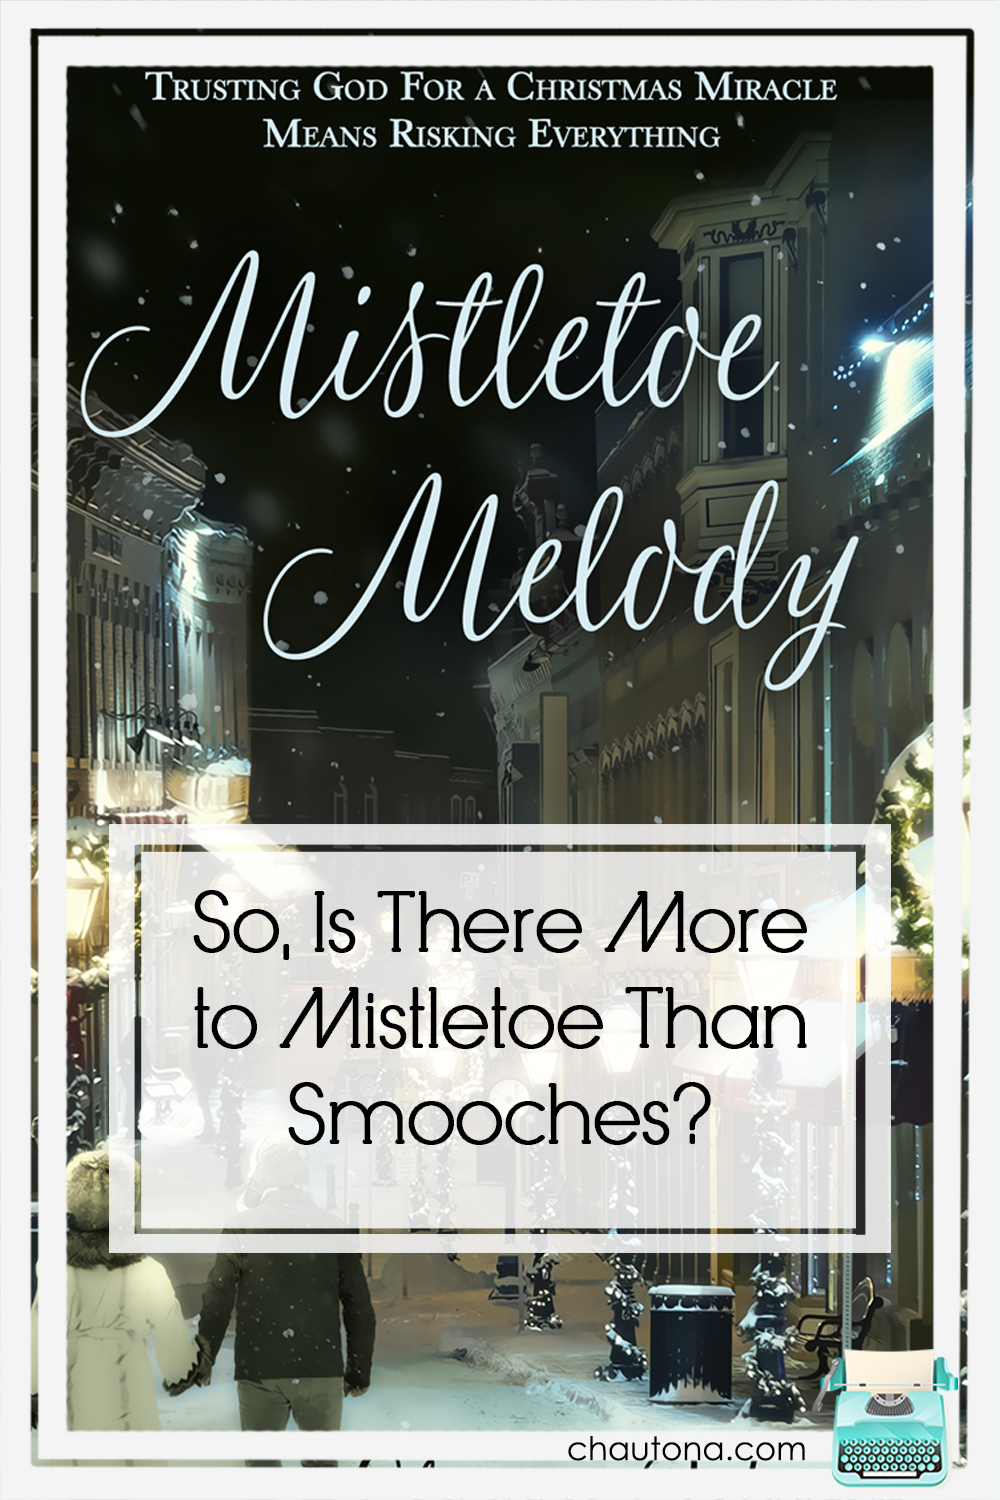 The Mistletoe books by Stacy Weeks will take you on a journey of relationships, trials, and more than one kind of love. They're instructional, too! via @chautonahavig